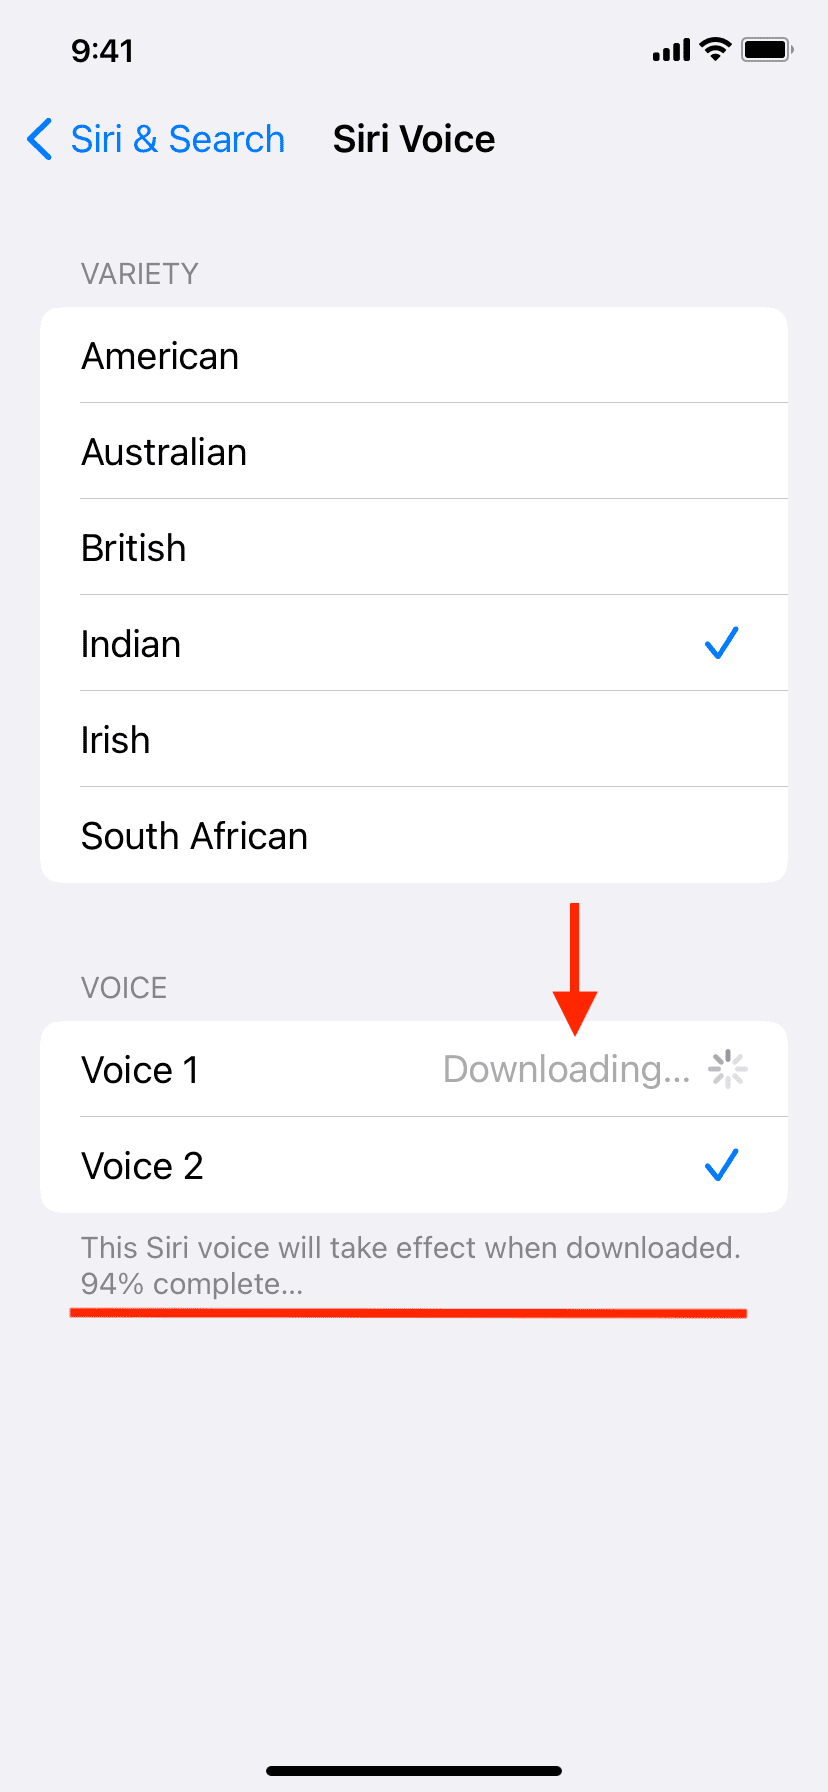 Siri voice downloading on iPhone takes extra space